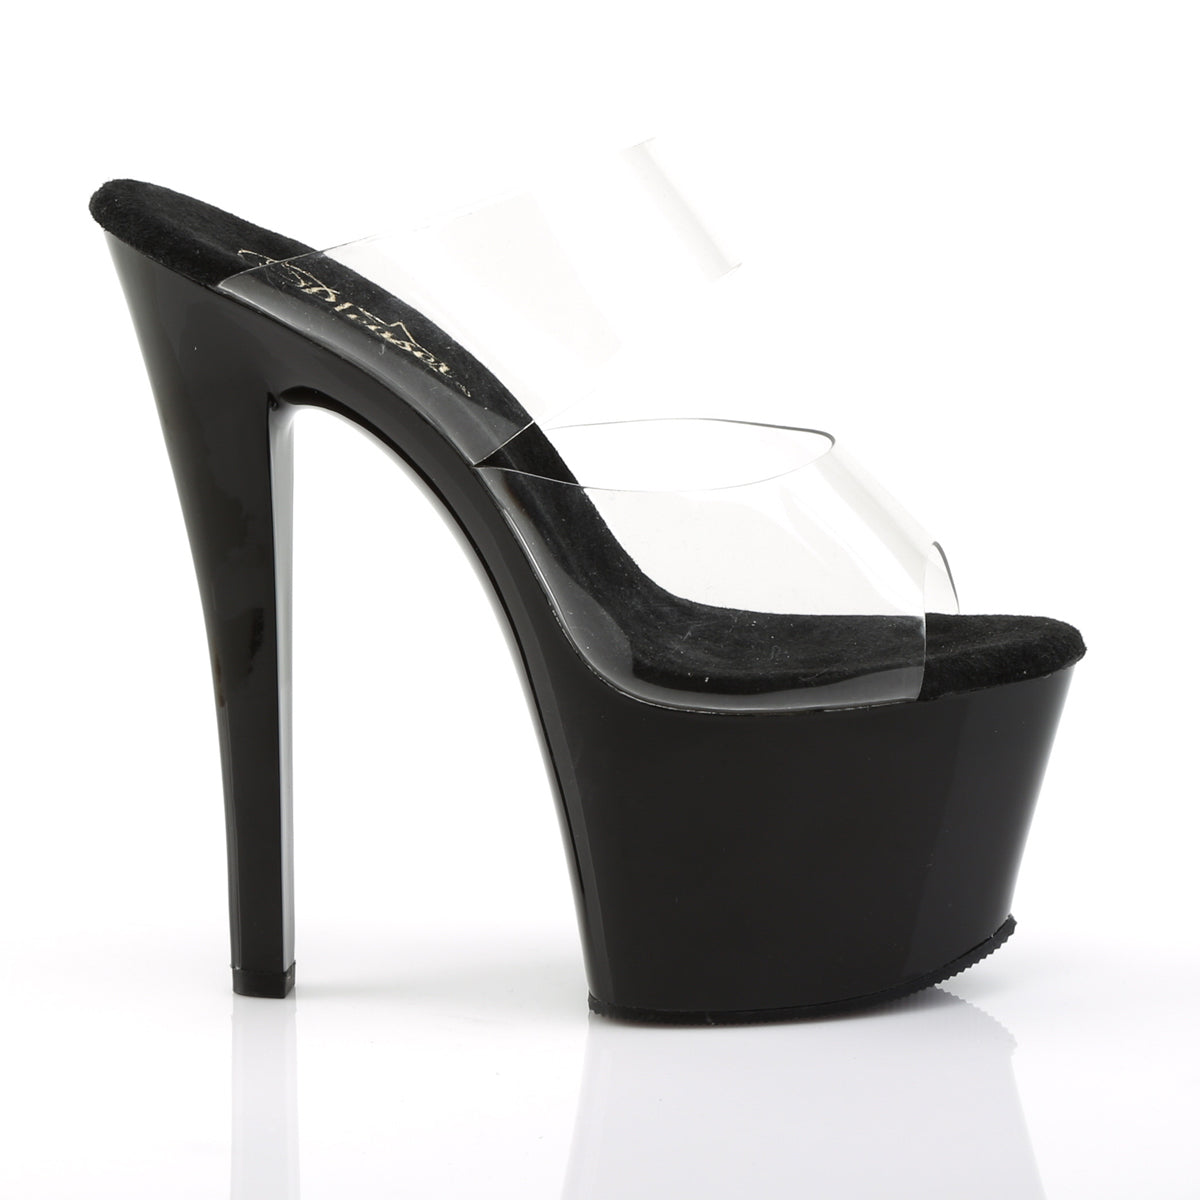 SKY-302 7" Heel Clear and Black Pole Dancing Platforms-Pleaser- Sexy Shoes Fetish Heels